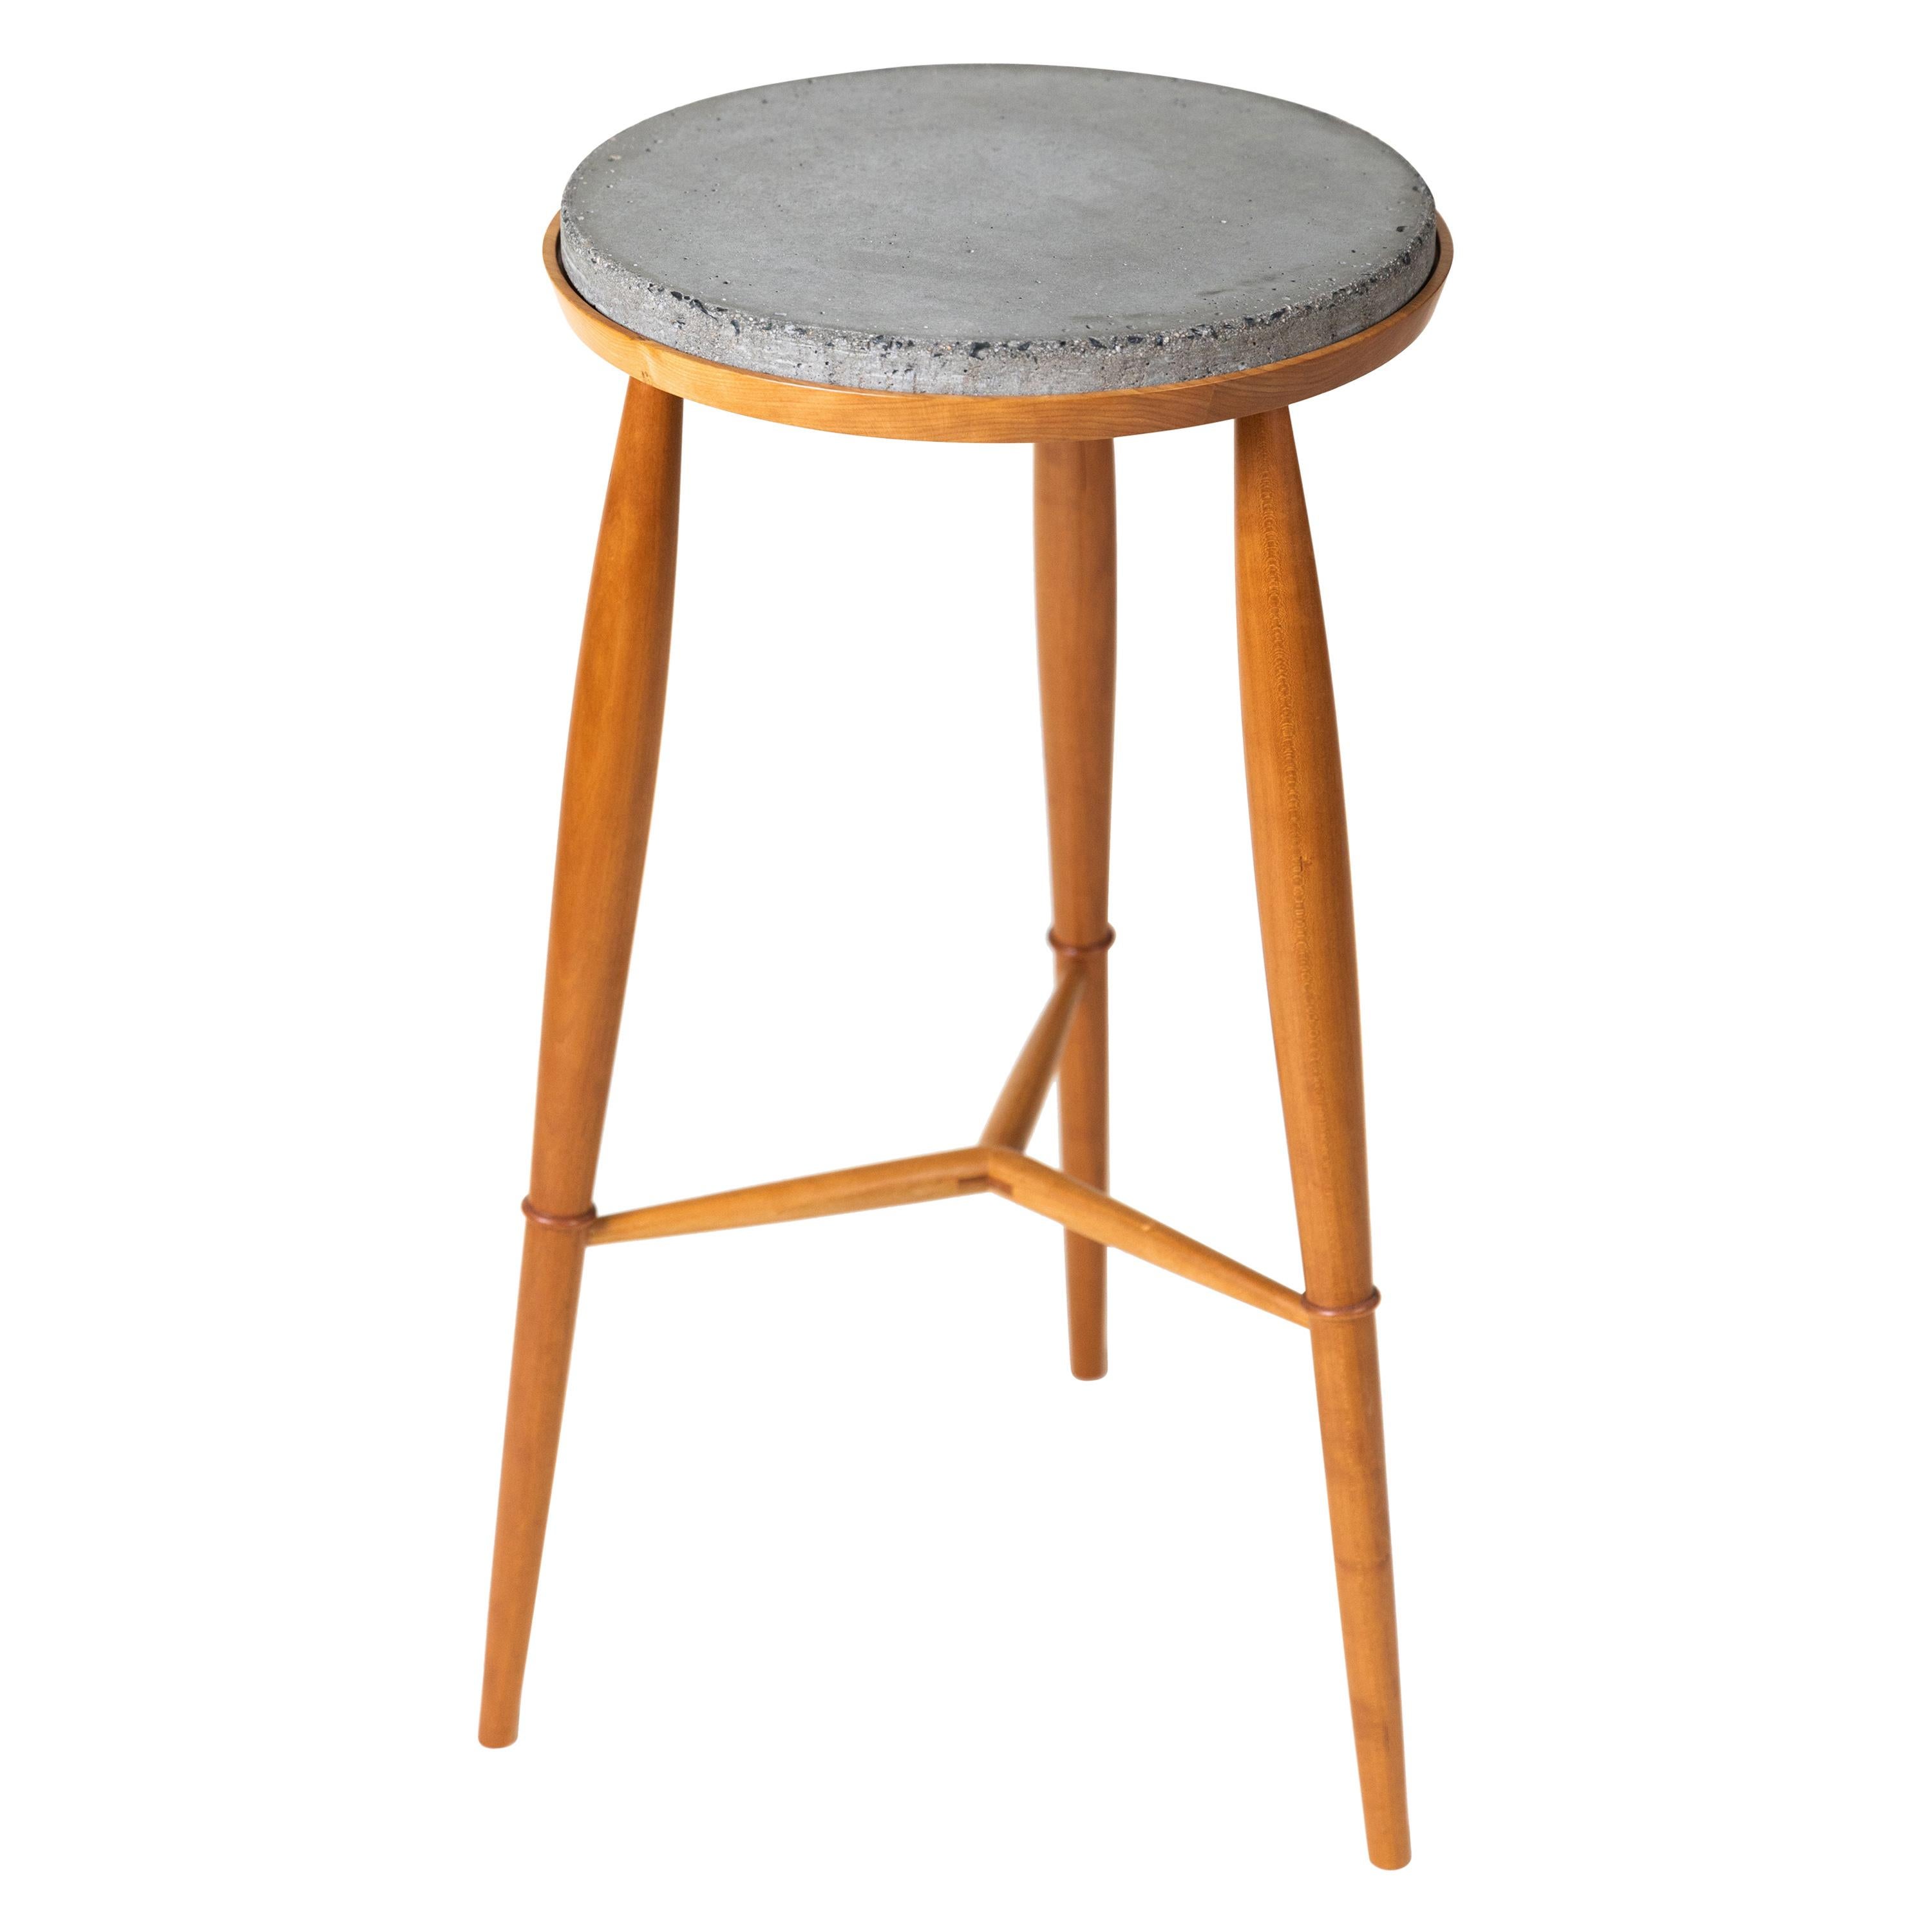 Round Plant Stand Side Table with Concrete Top and Turned Legs